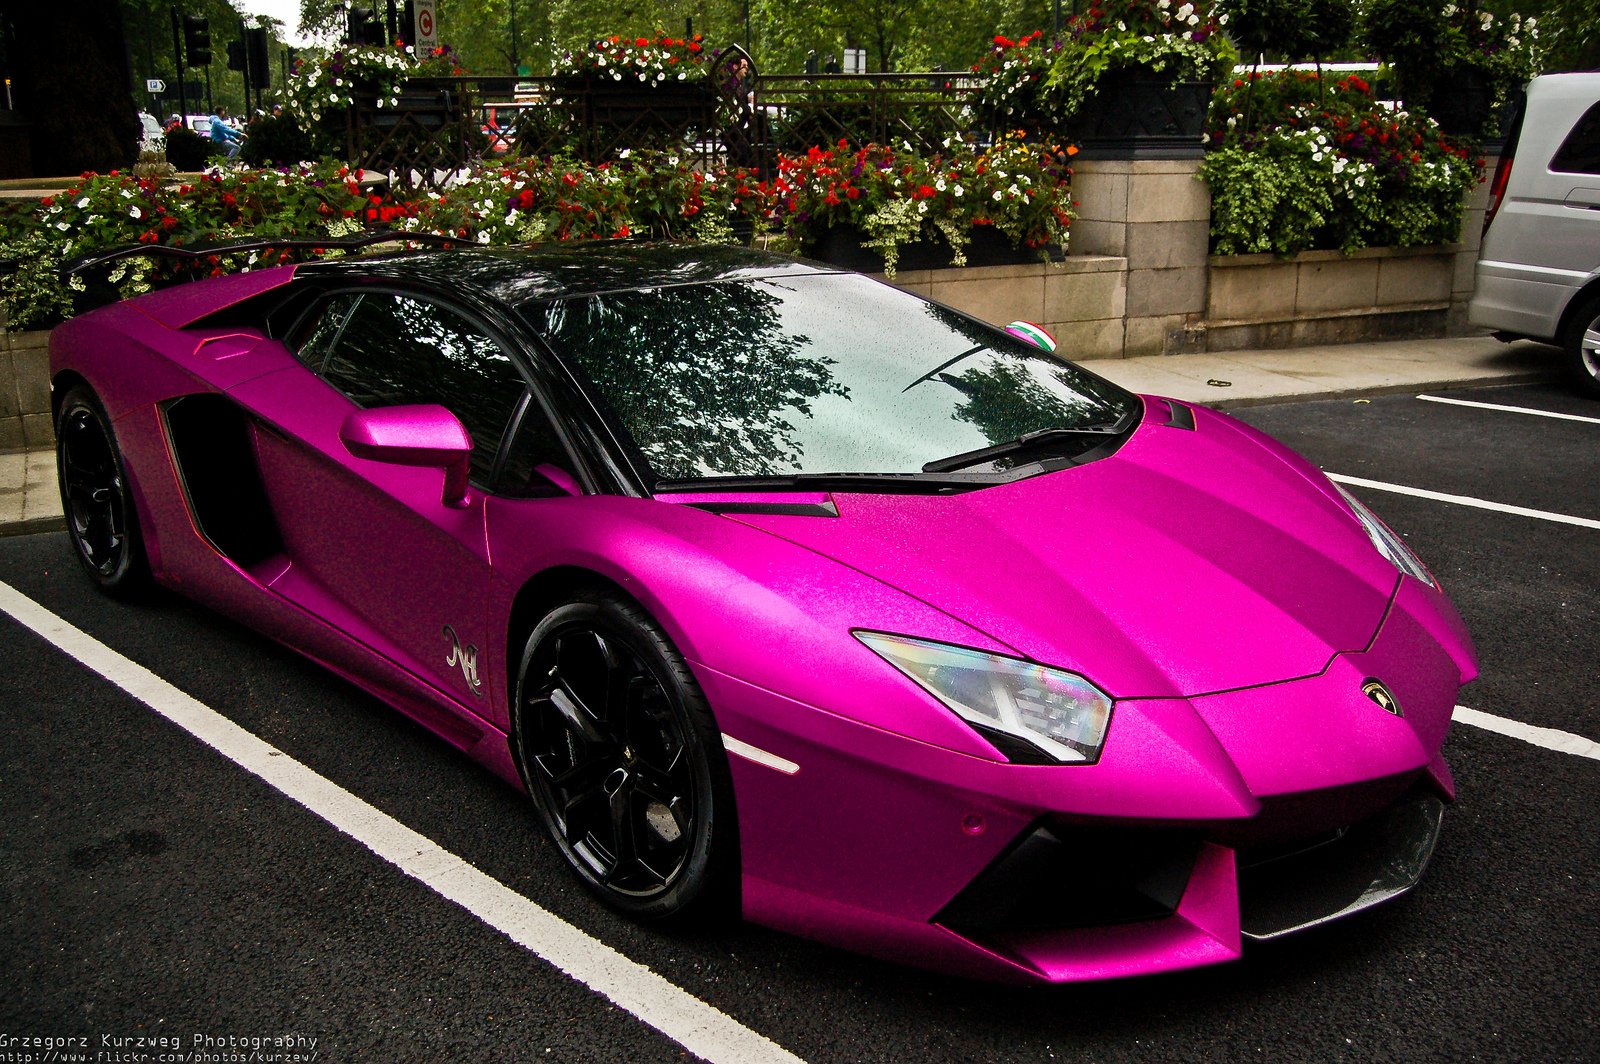 aventador, Purple, Lamborghini, Lp700, Supercars, Tuning, Wrapping  Wallpapers HD / Desktop and Mobile Backgrounds